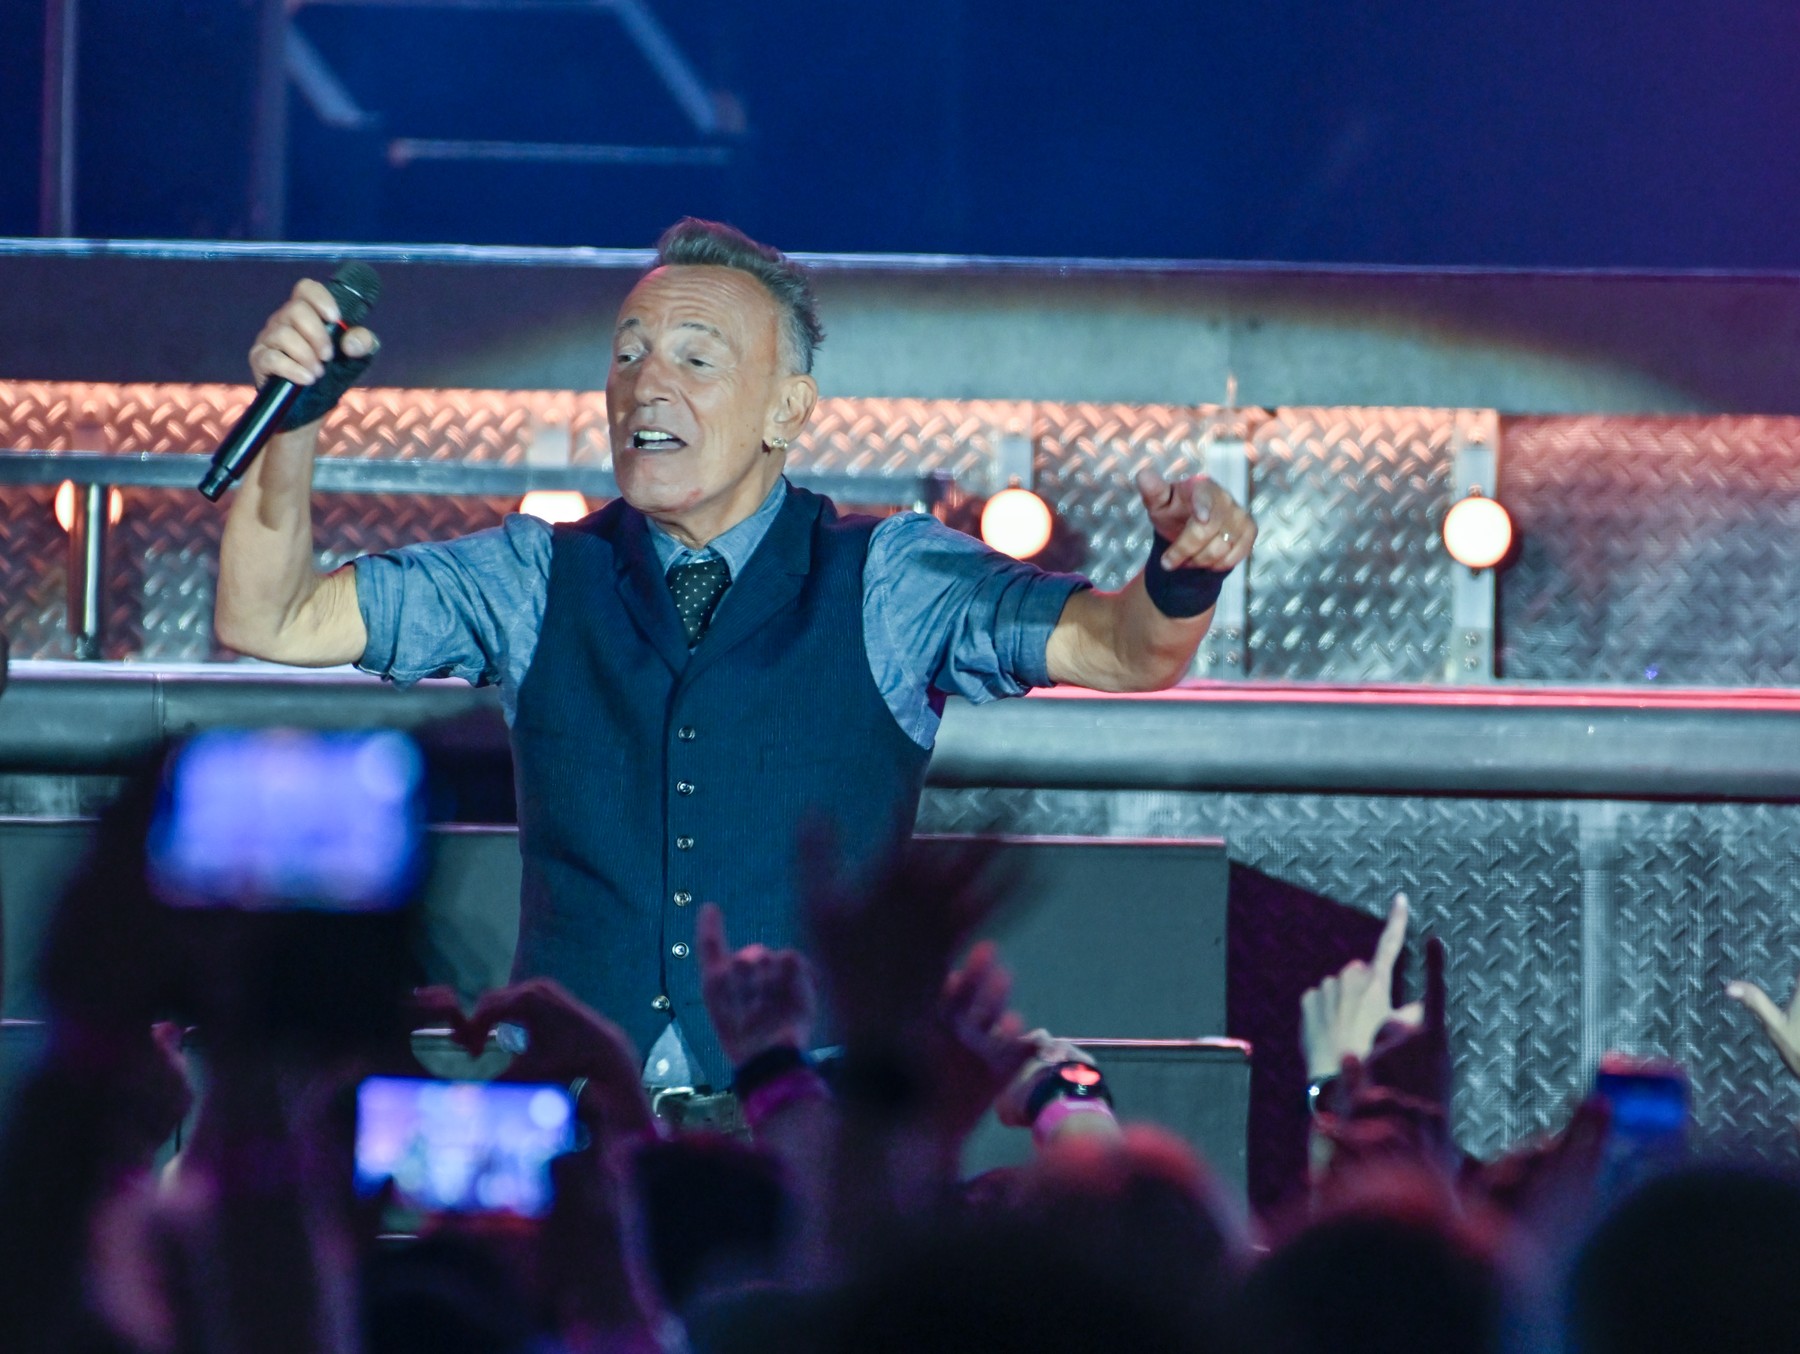 Bruce Springsteen and the E Street Band play first night of European leg of their 2024 tour at Principality Stadium. Cardiff, Wales,,Image: 870591498, License: Rights-managed, Restrictions: , Model Release: no, Credit line: Jules Annan / Avalon / Profimedia